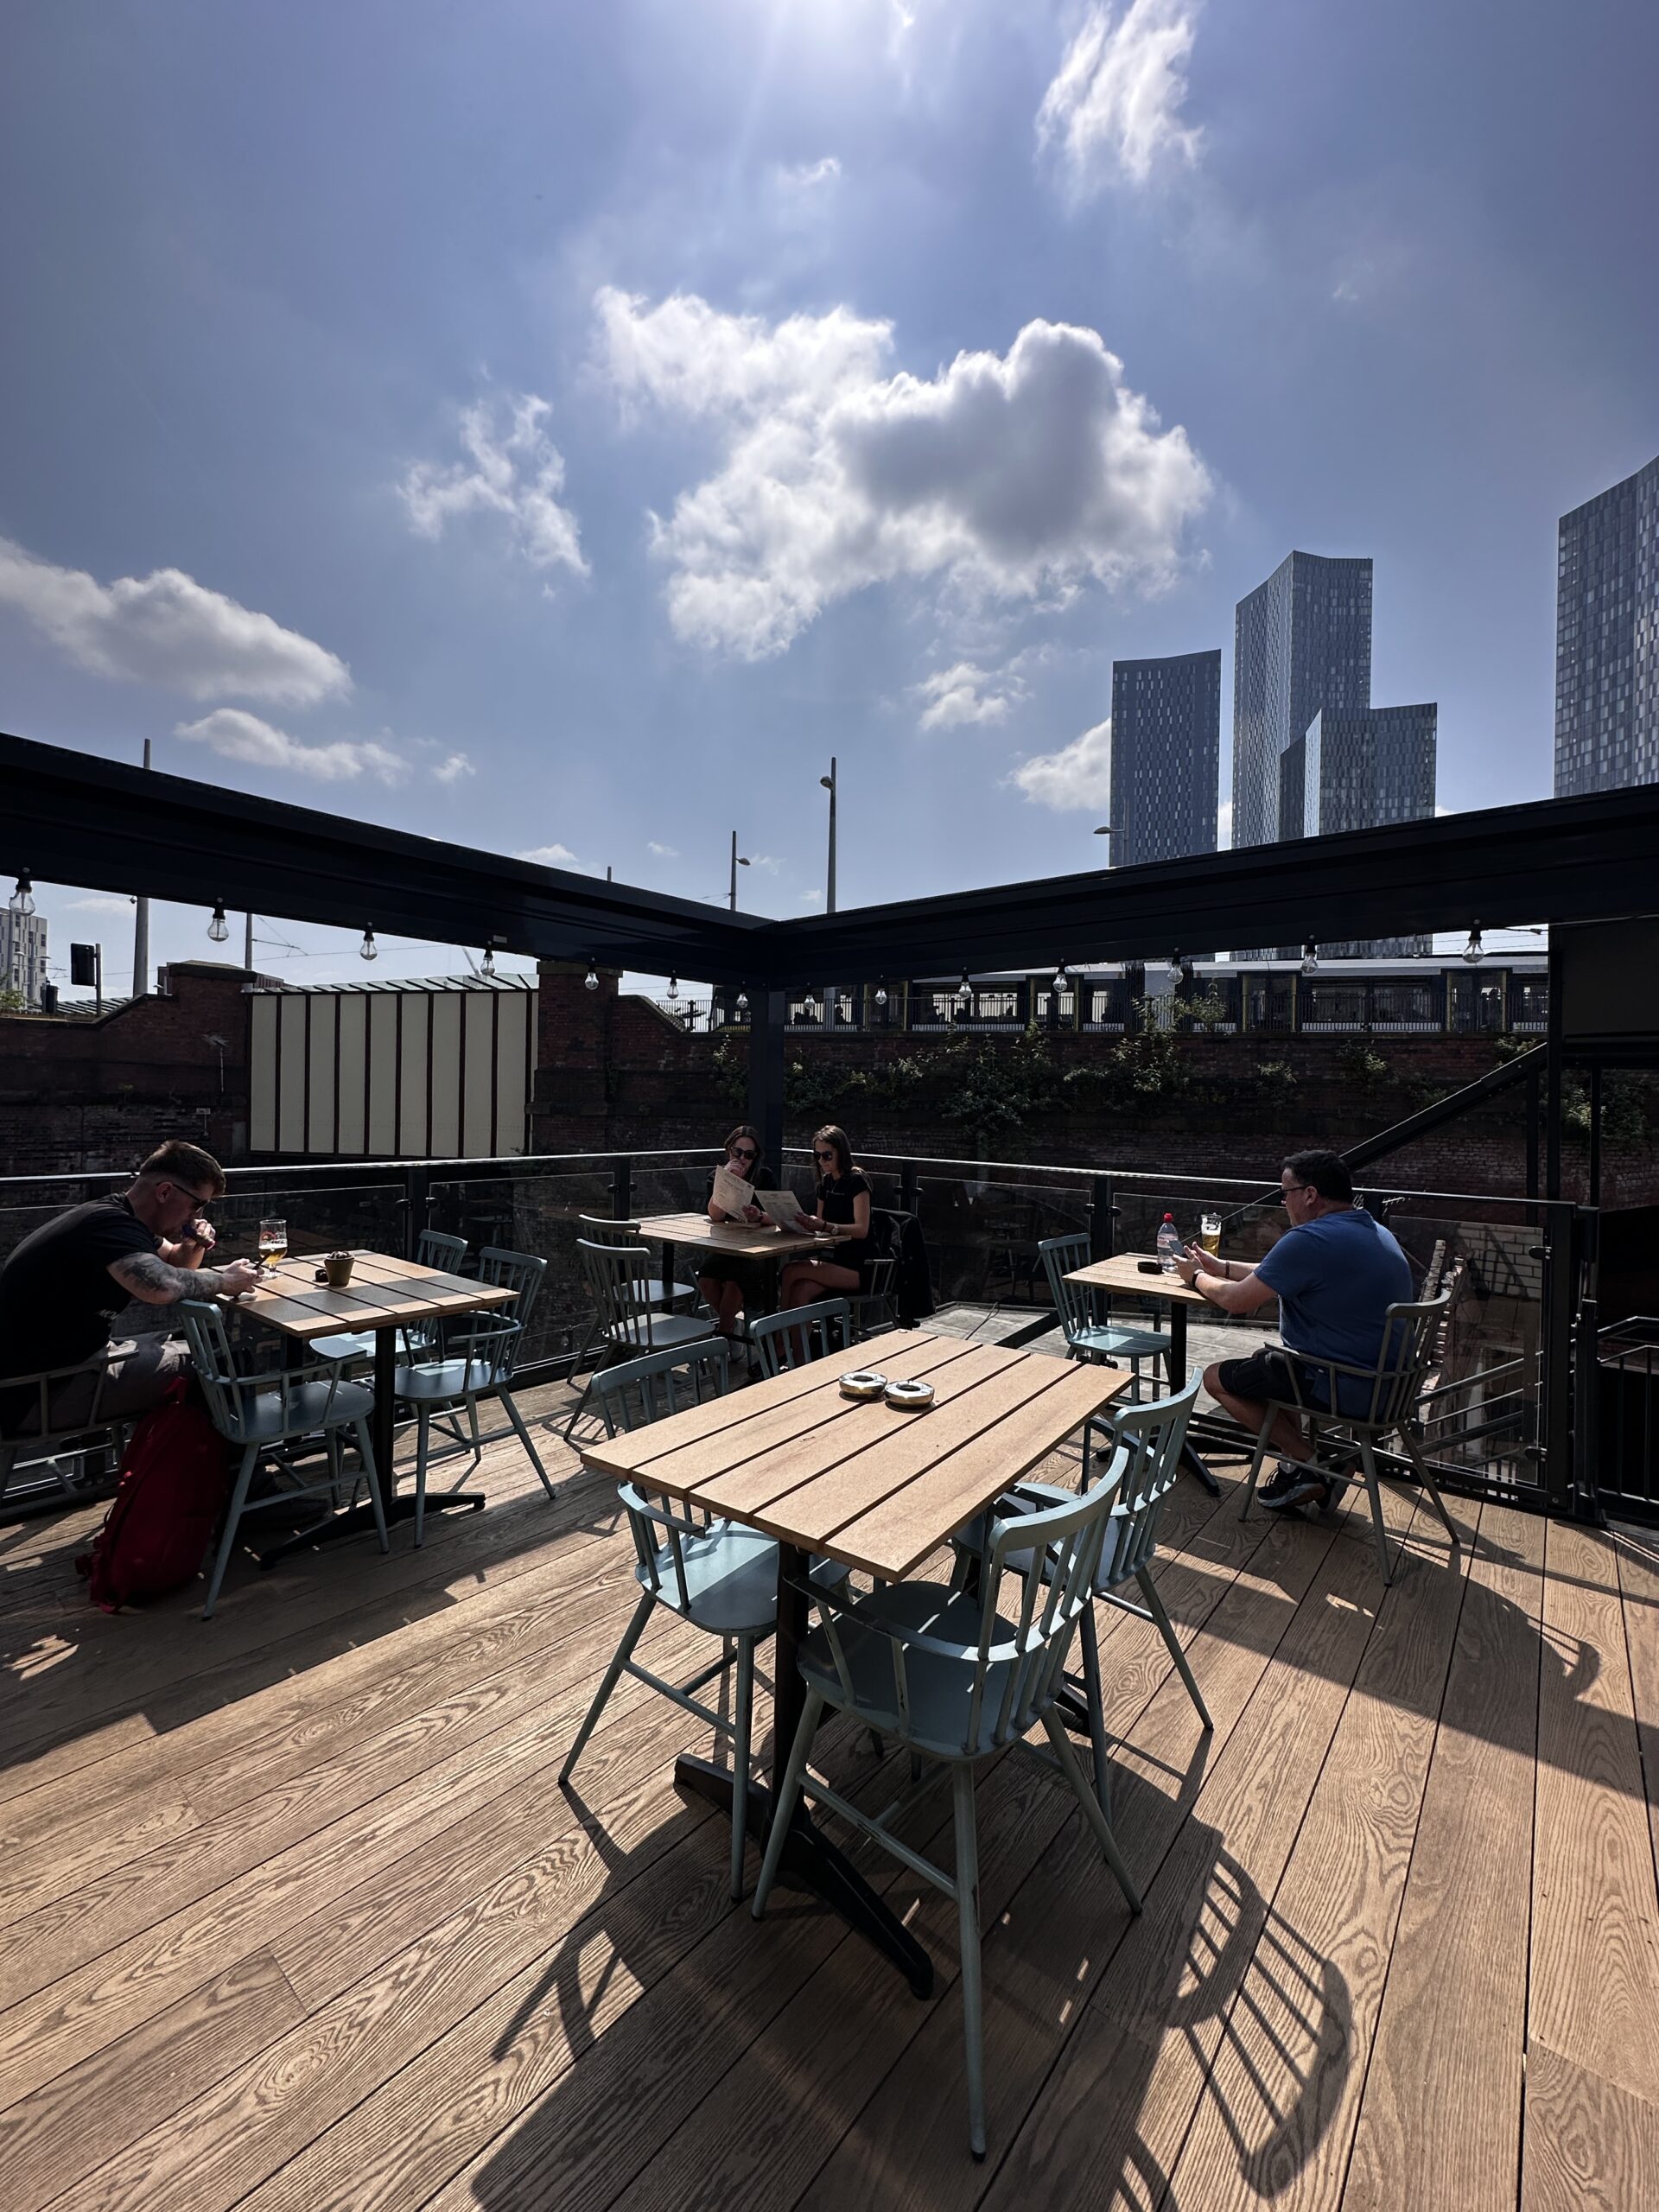 The Deansgate's roof terrace last summer. Credit: The Manc Group